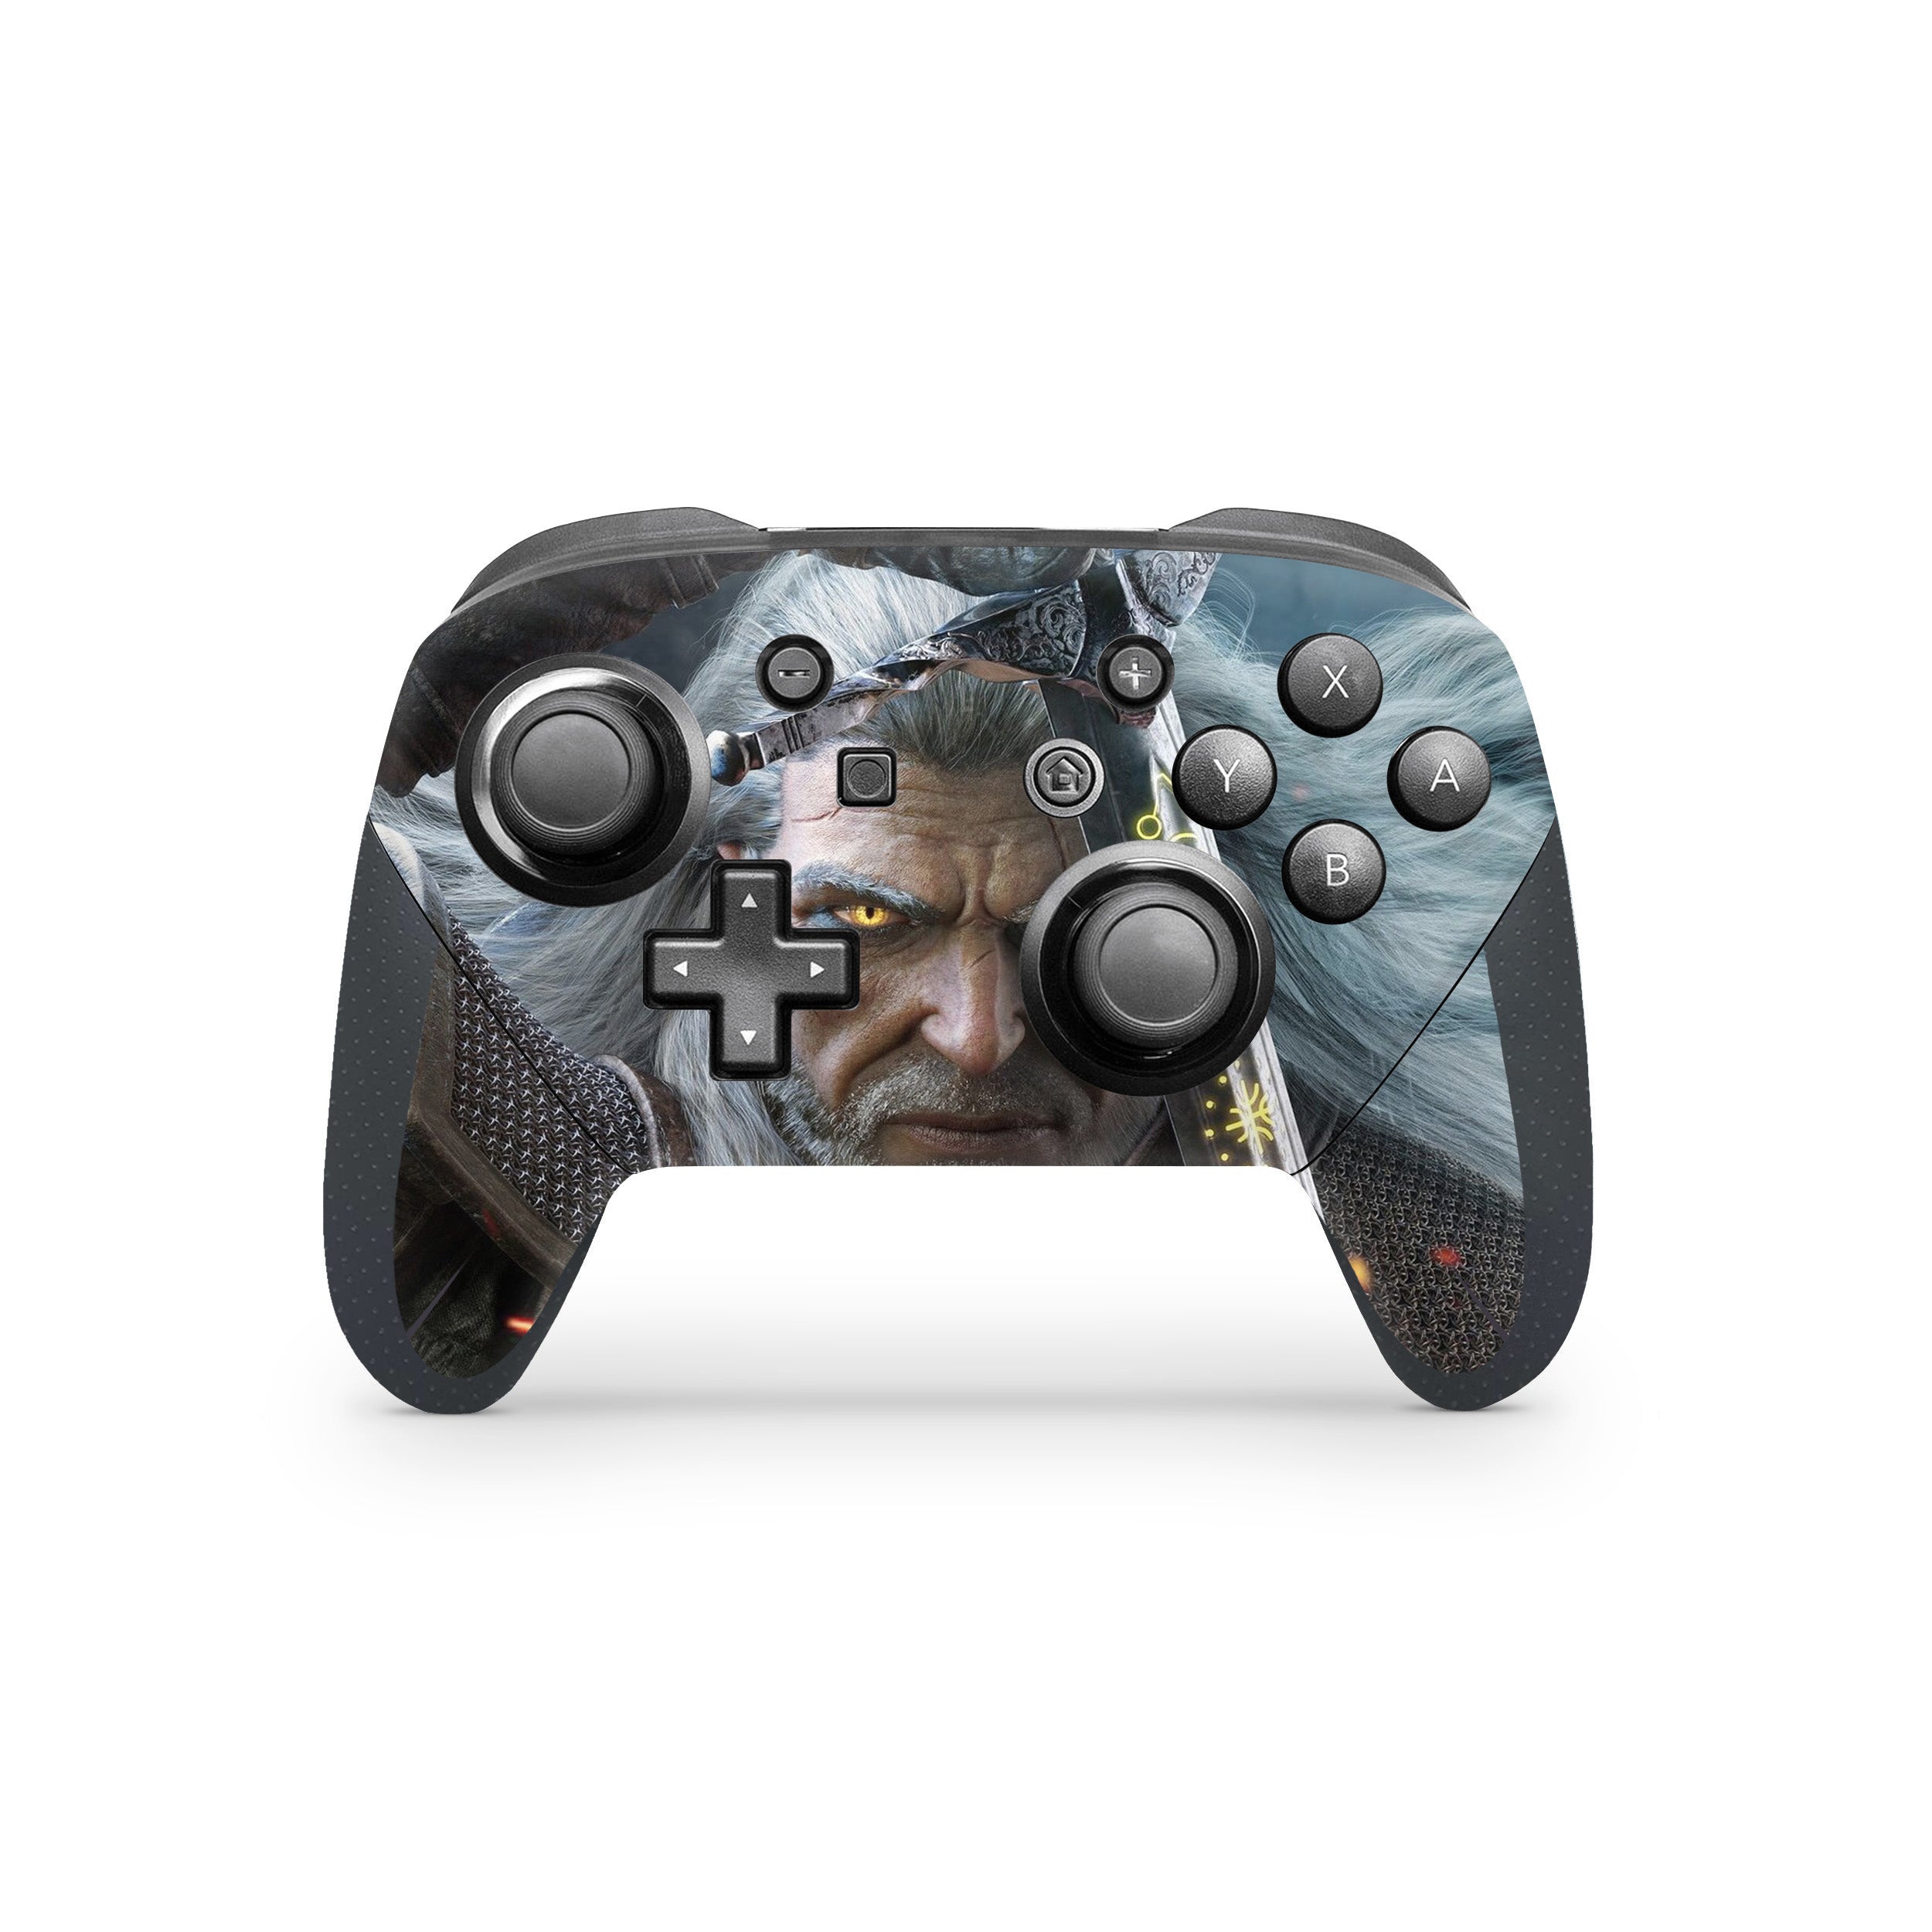 A video game skin featuring a The Witcher 3 design for the Switch Pro Controller.